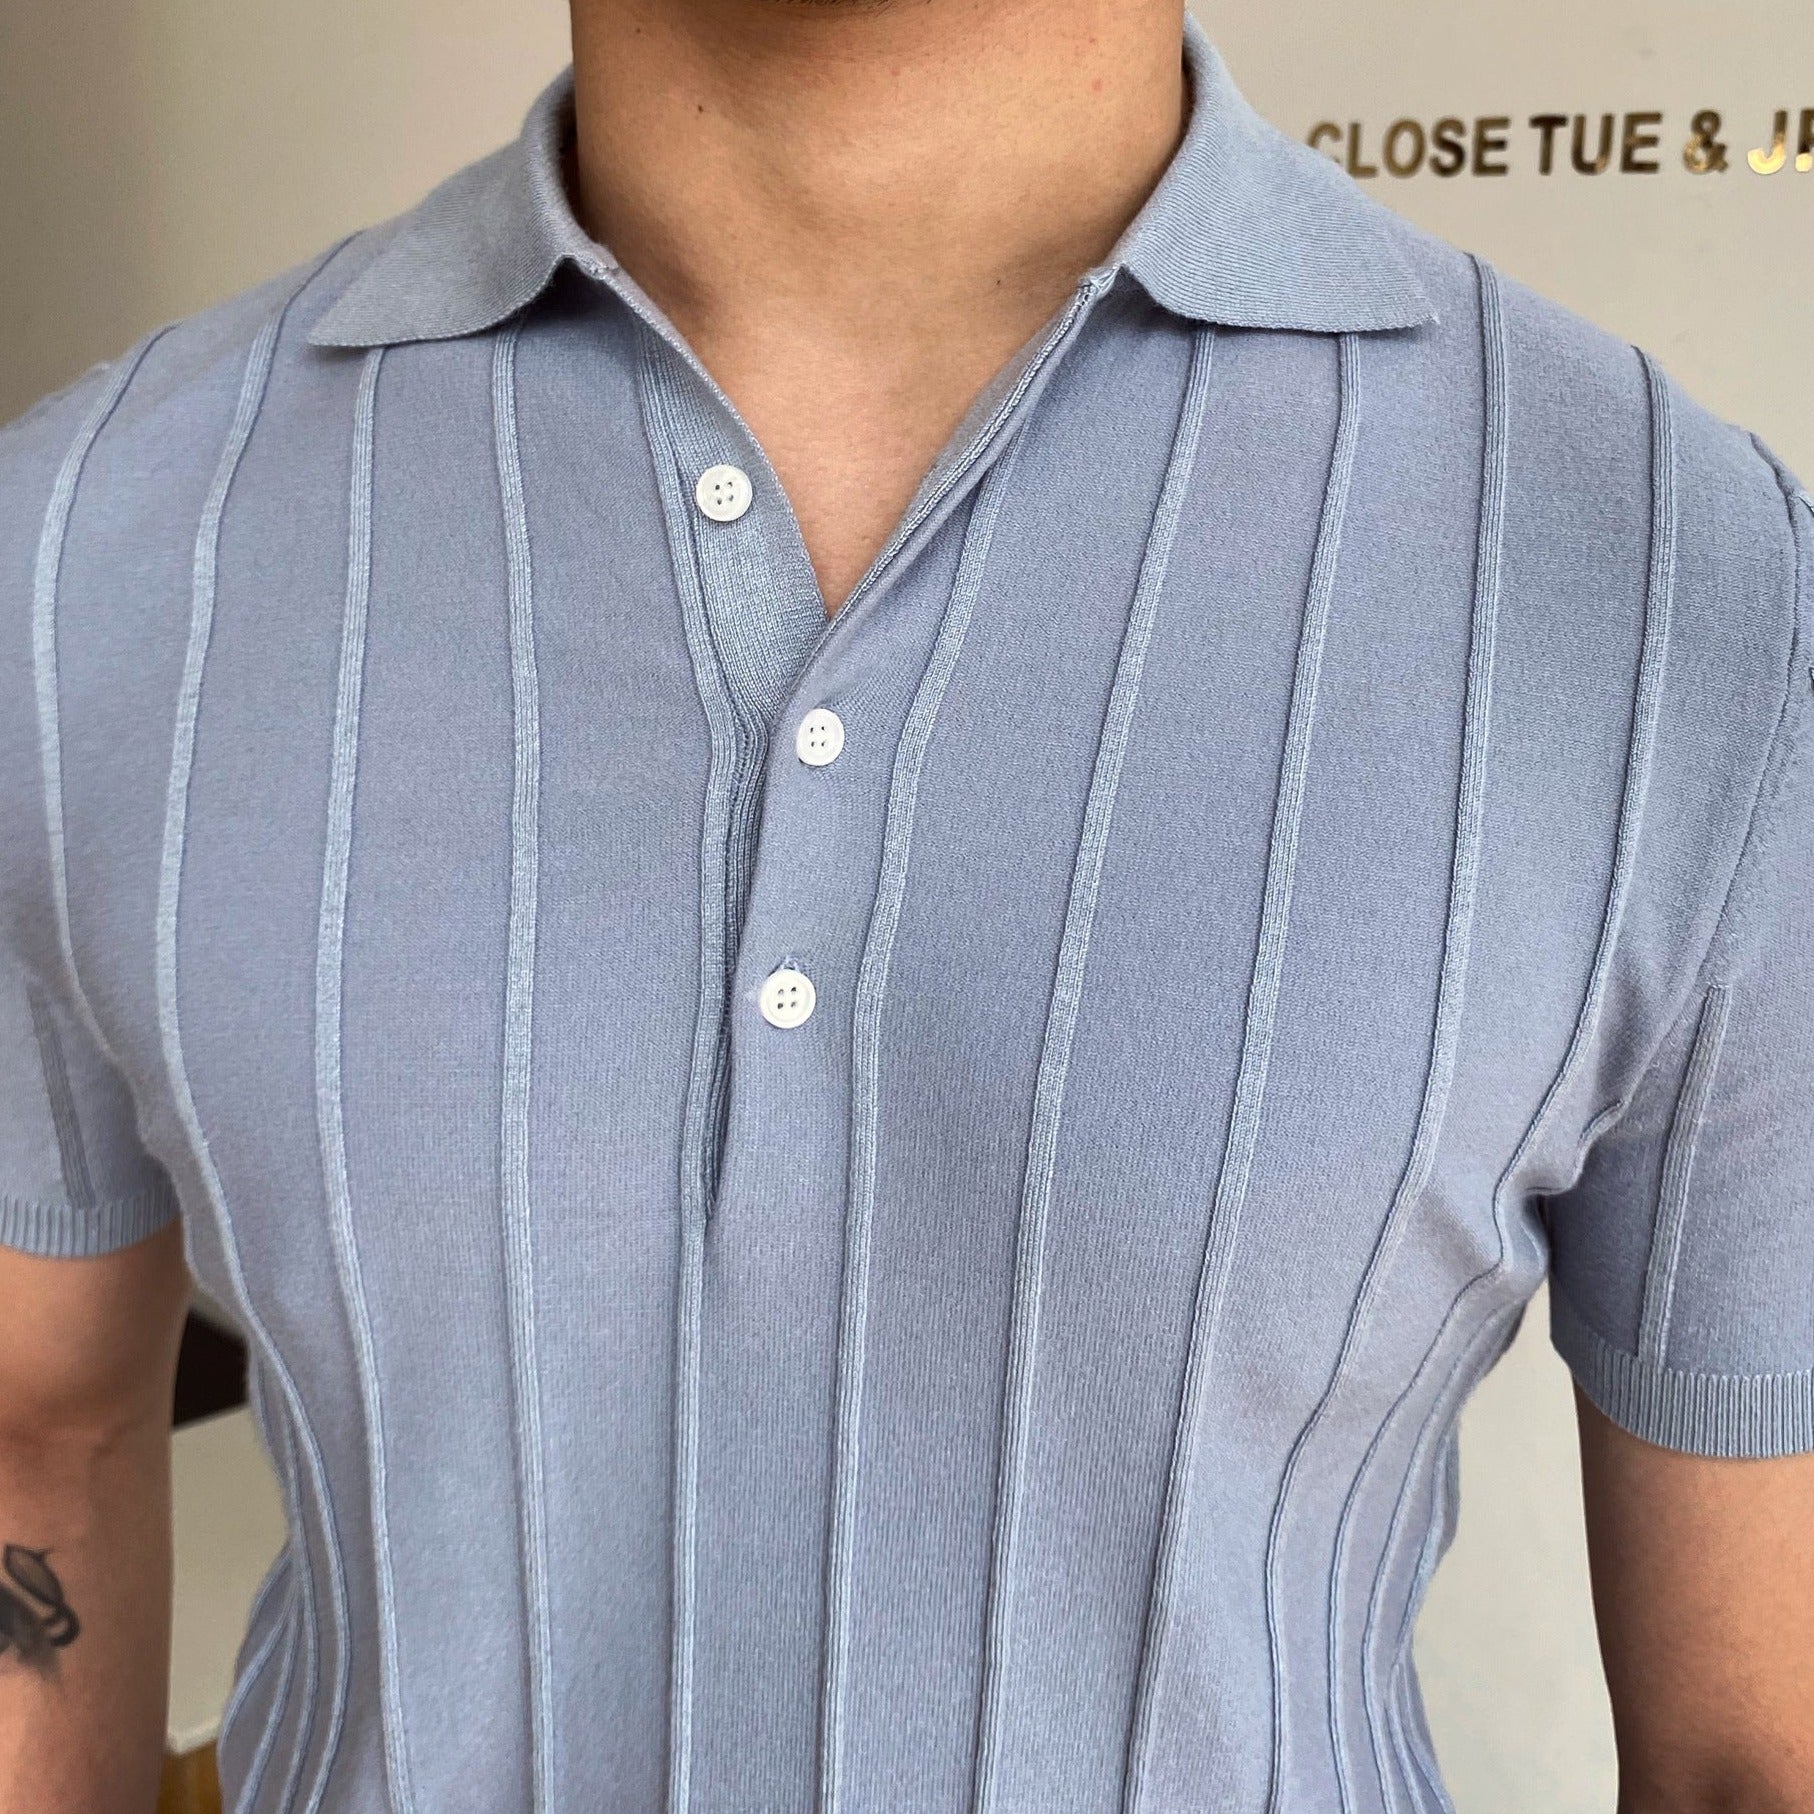 OLD MONEY Striped Polo Shirt - WEAR OLD MONEY